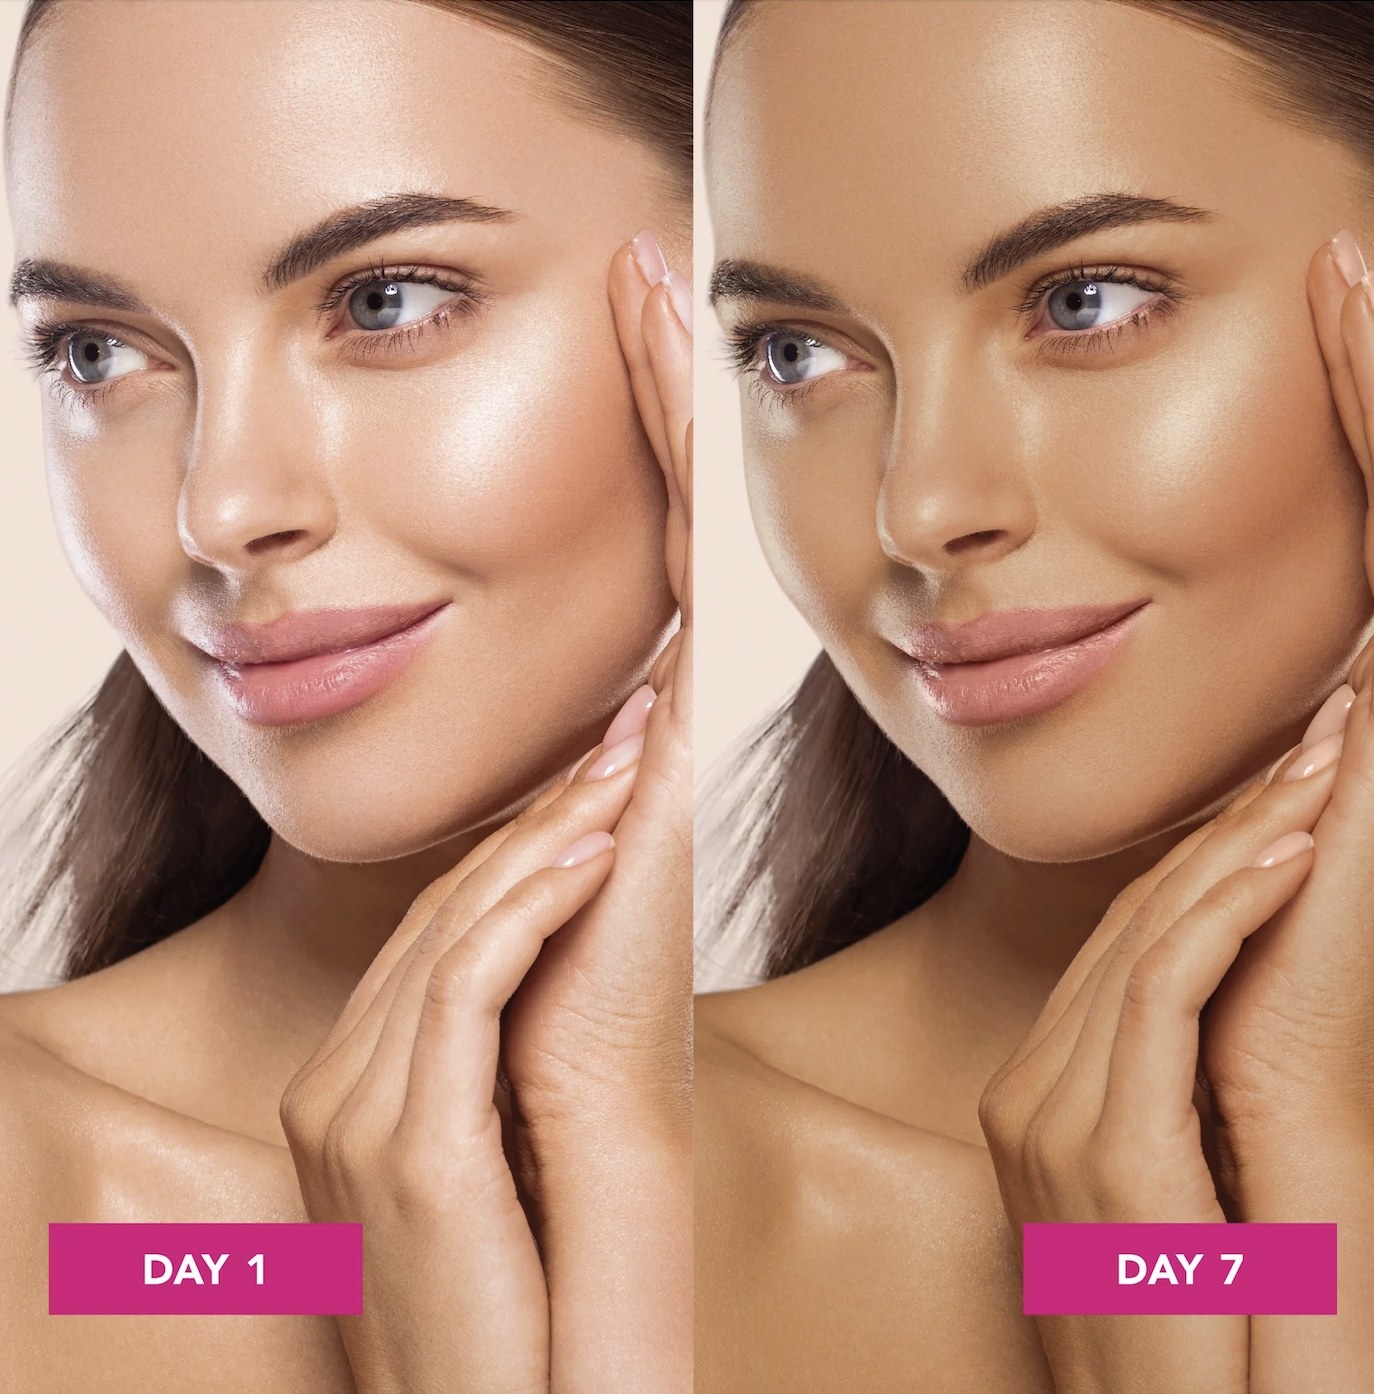 A before and after image of a person using self-tanner